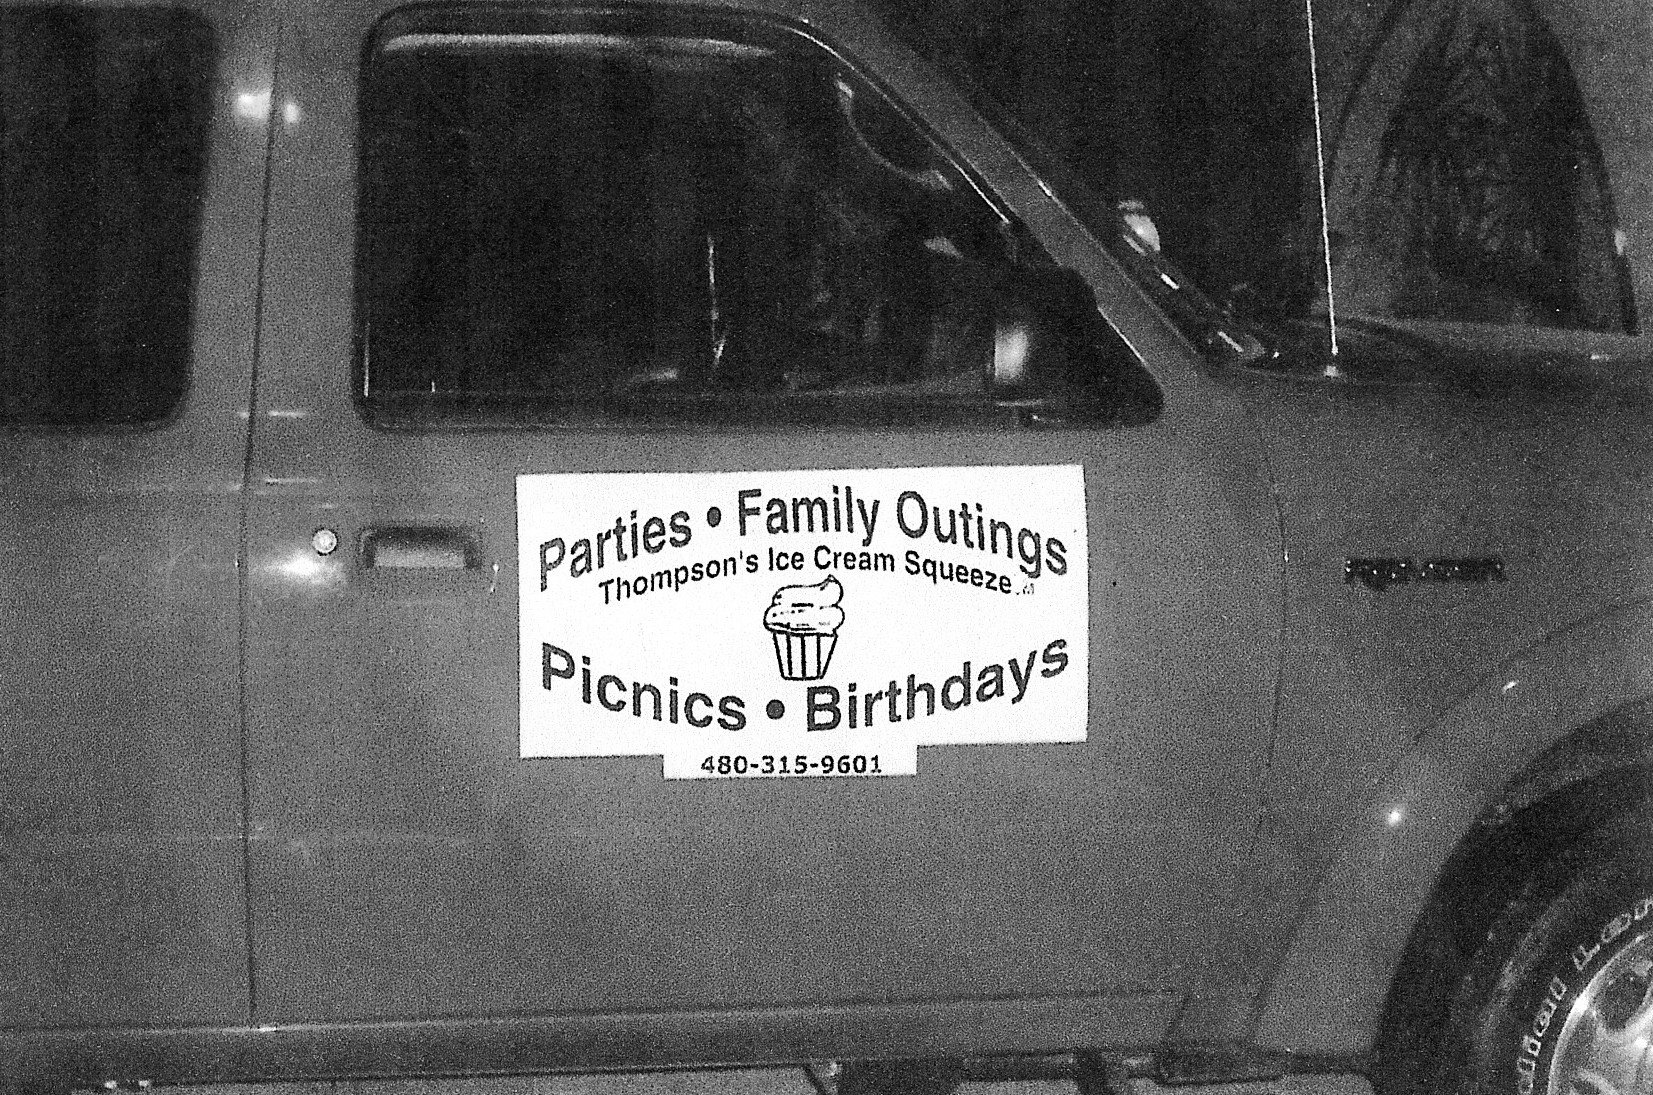  PARTIES Â· FAMILY OUTINGS PICNICS Â· BIRTHDAYS THOMPSON'S ICE CREAM SQUEEZE 480-315-9601